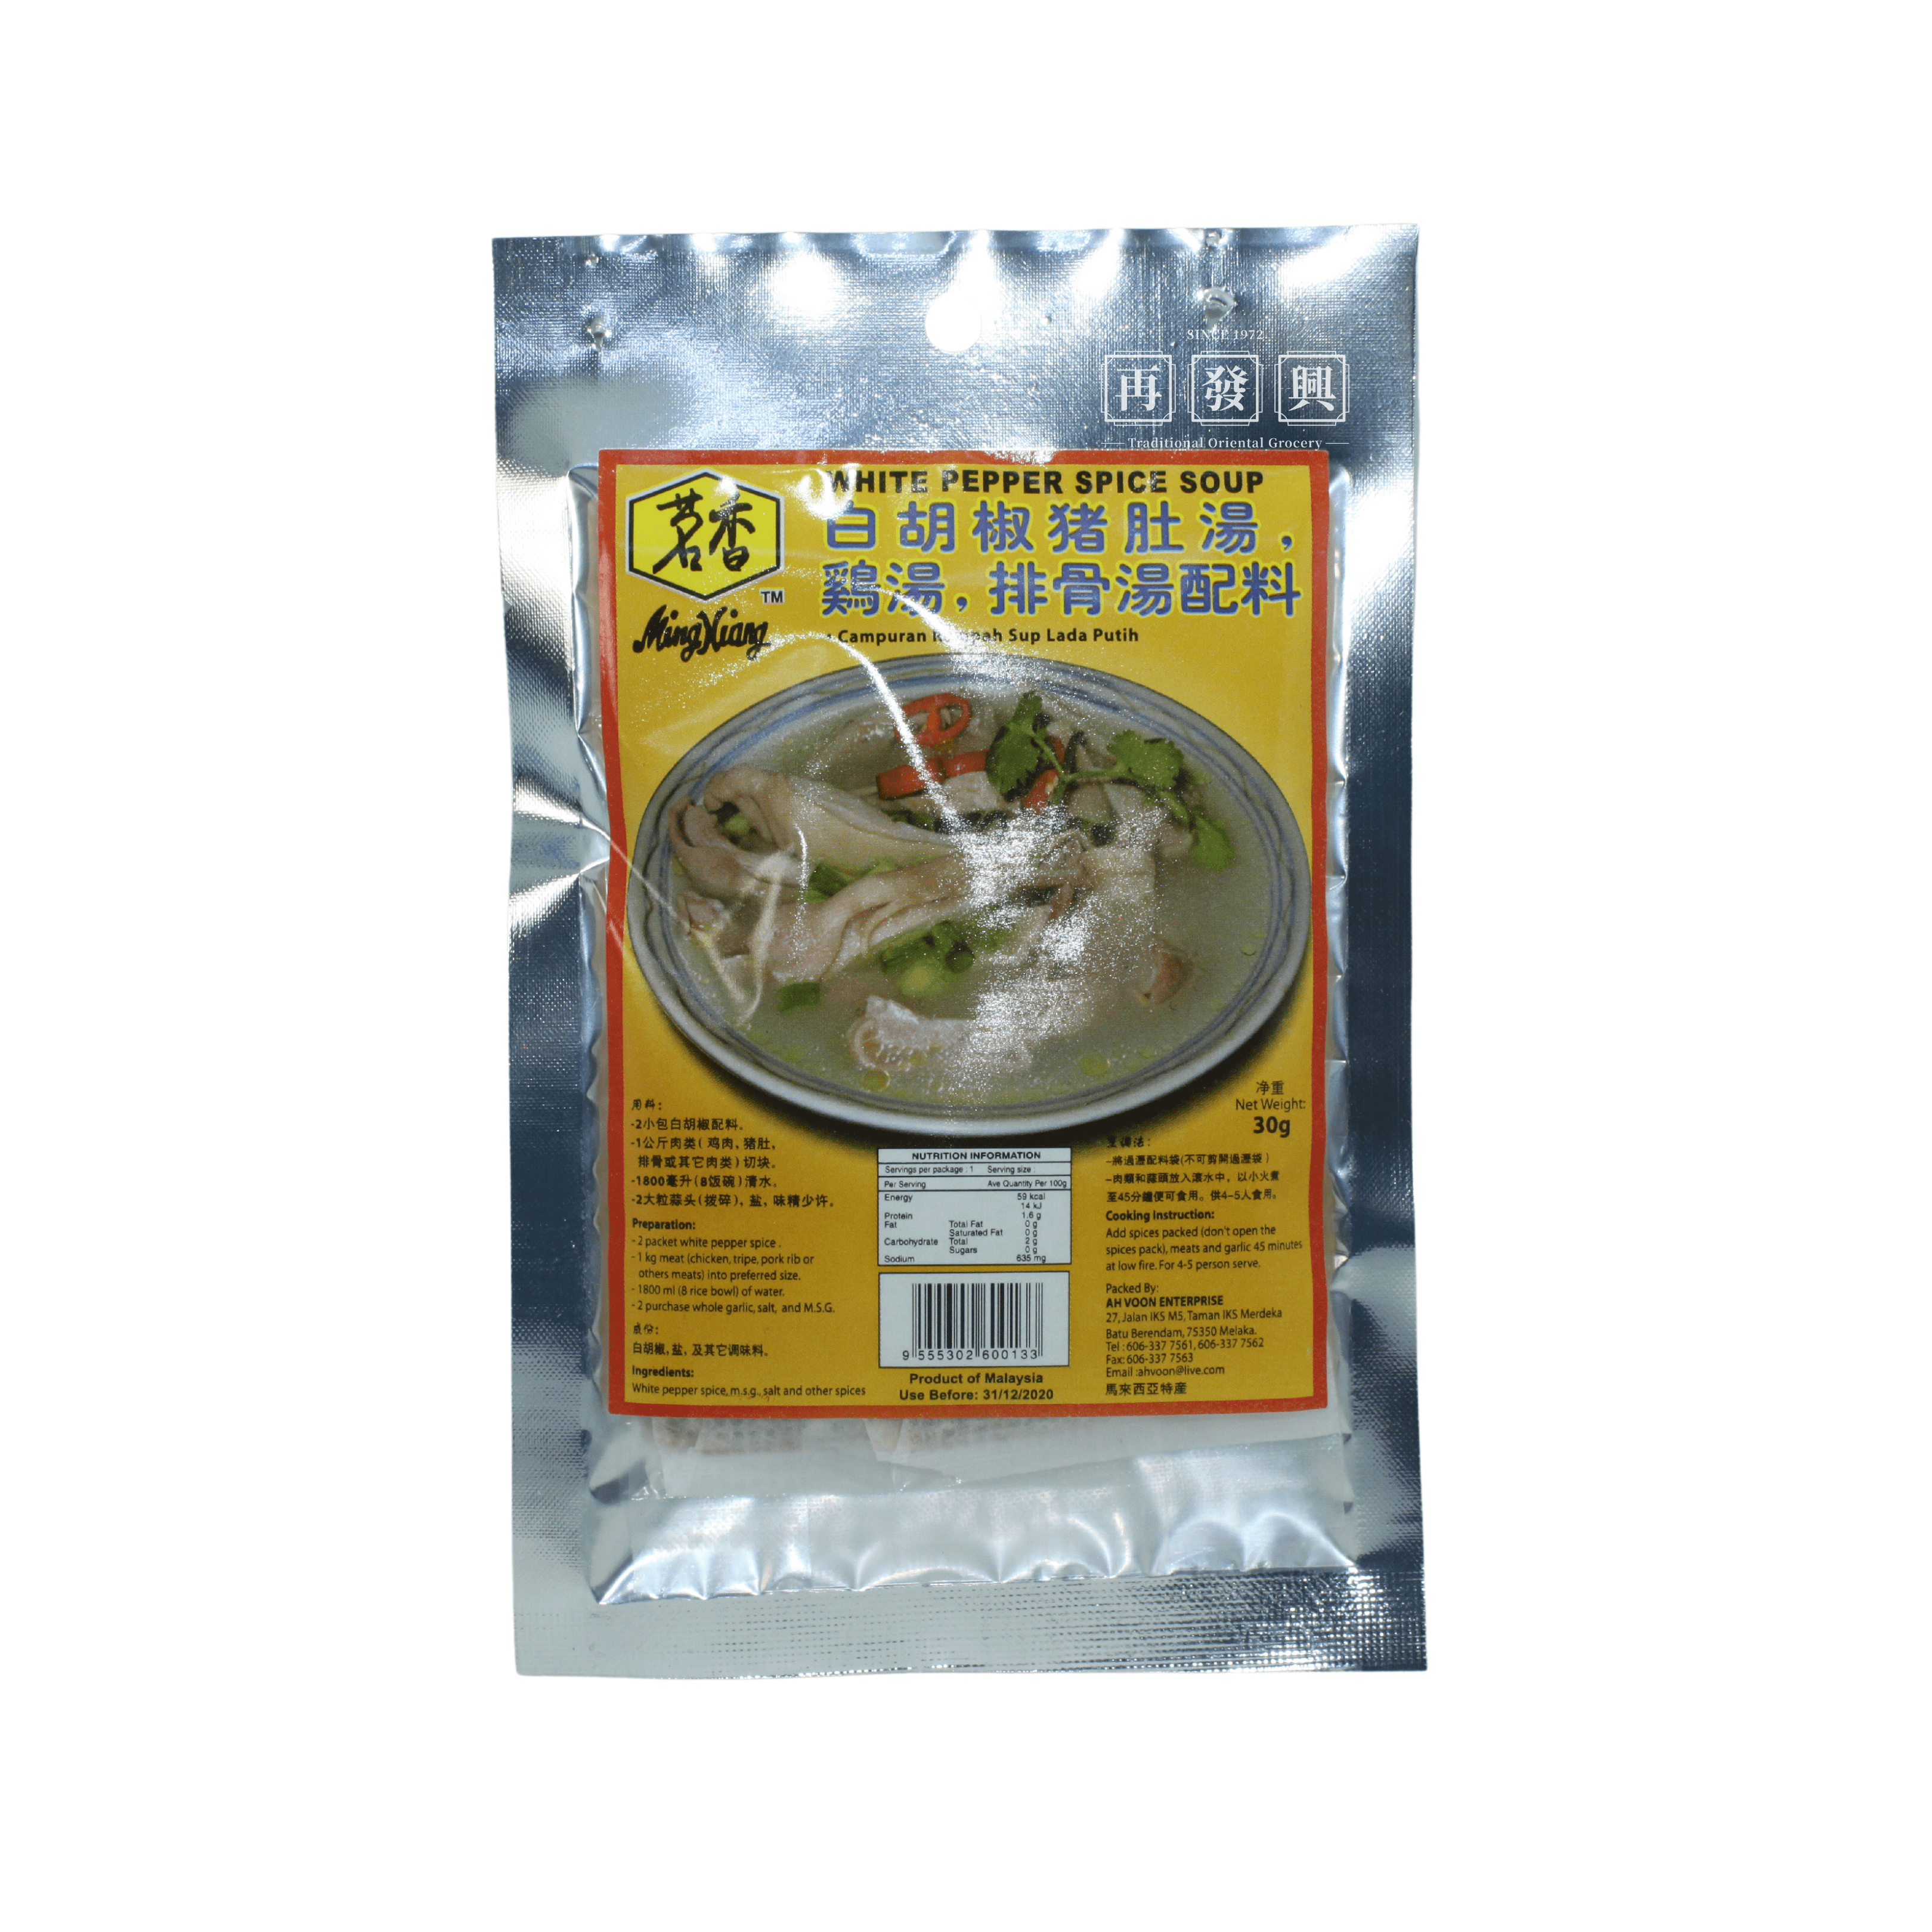 Ming Xiang White Pepper Spice Soup 30g